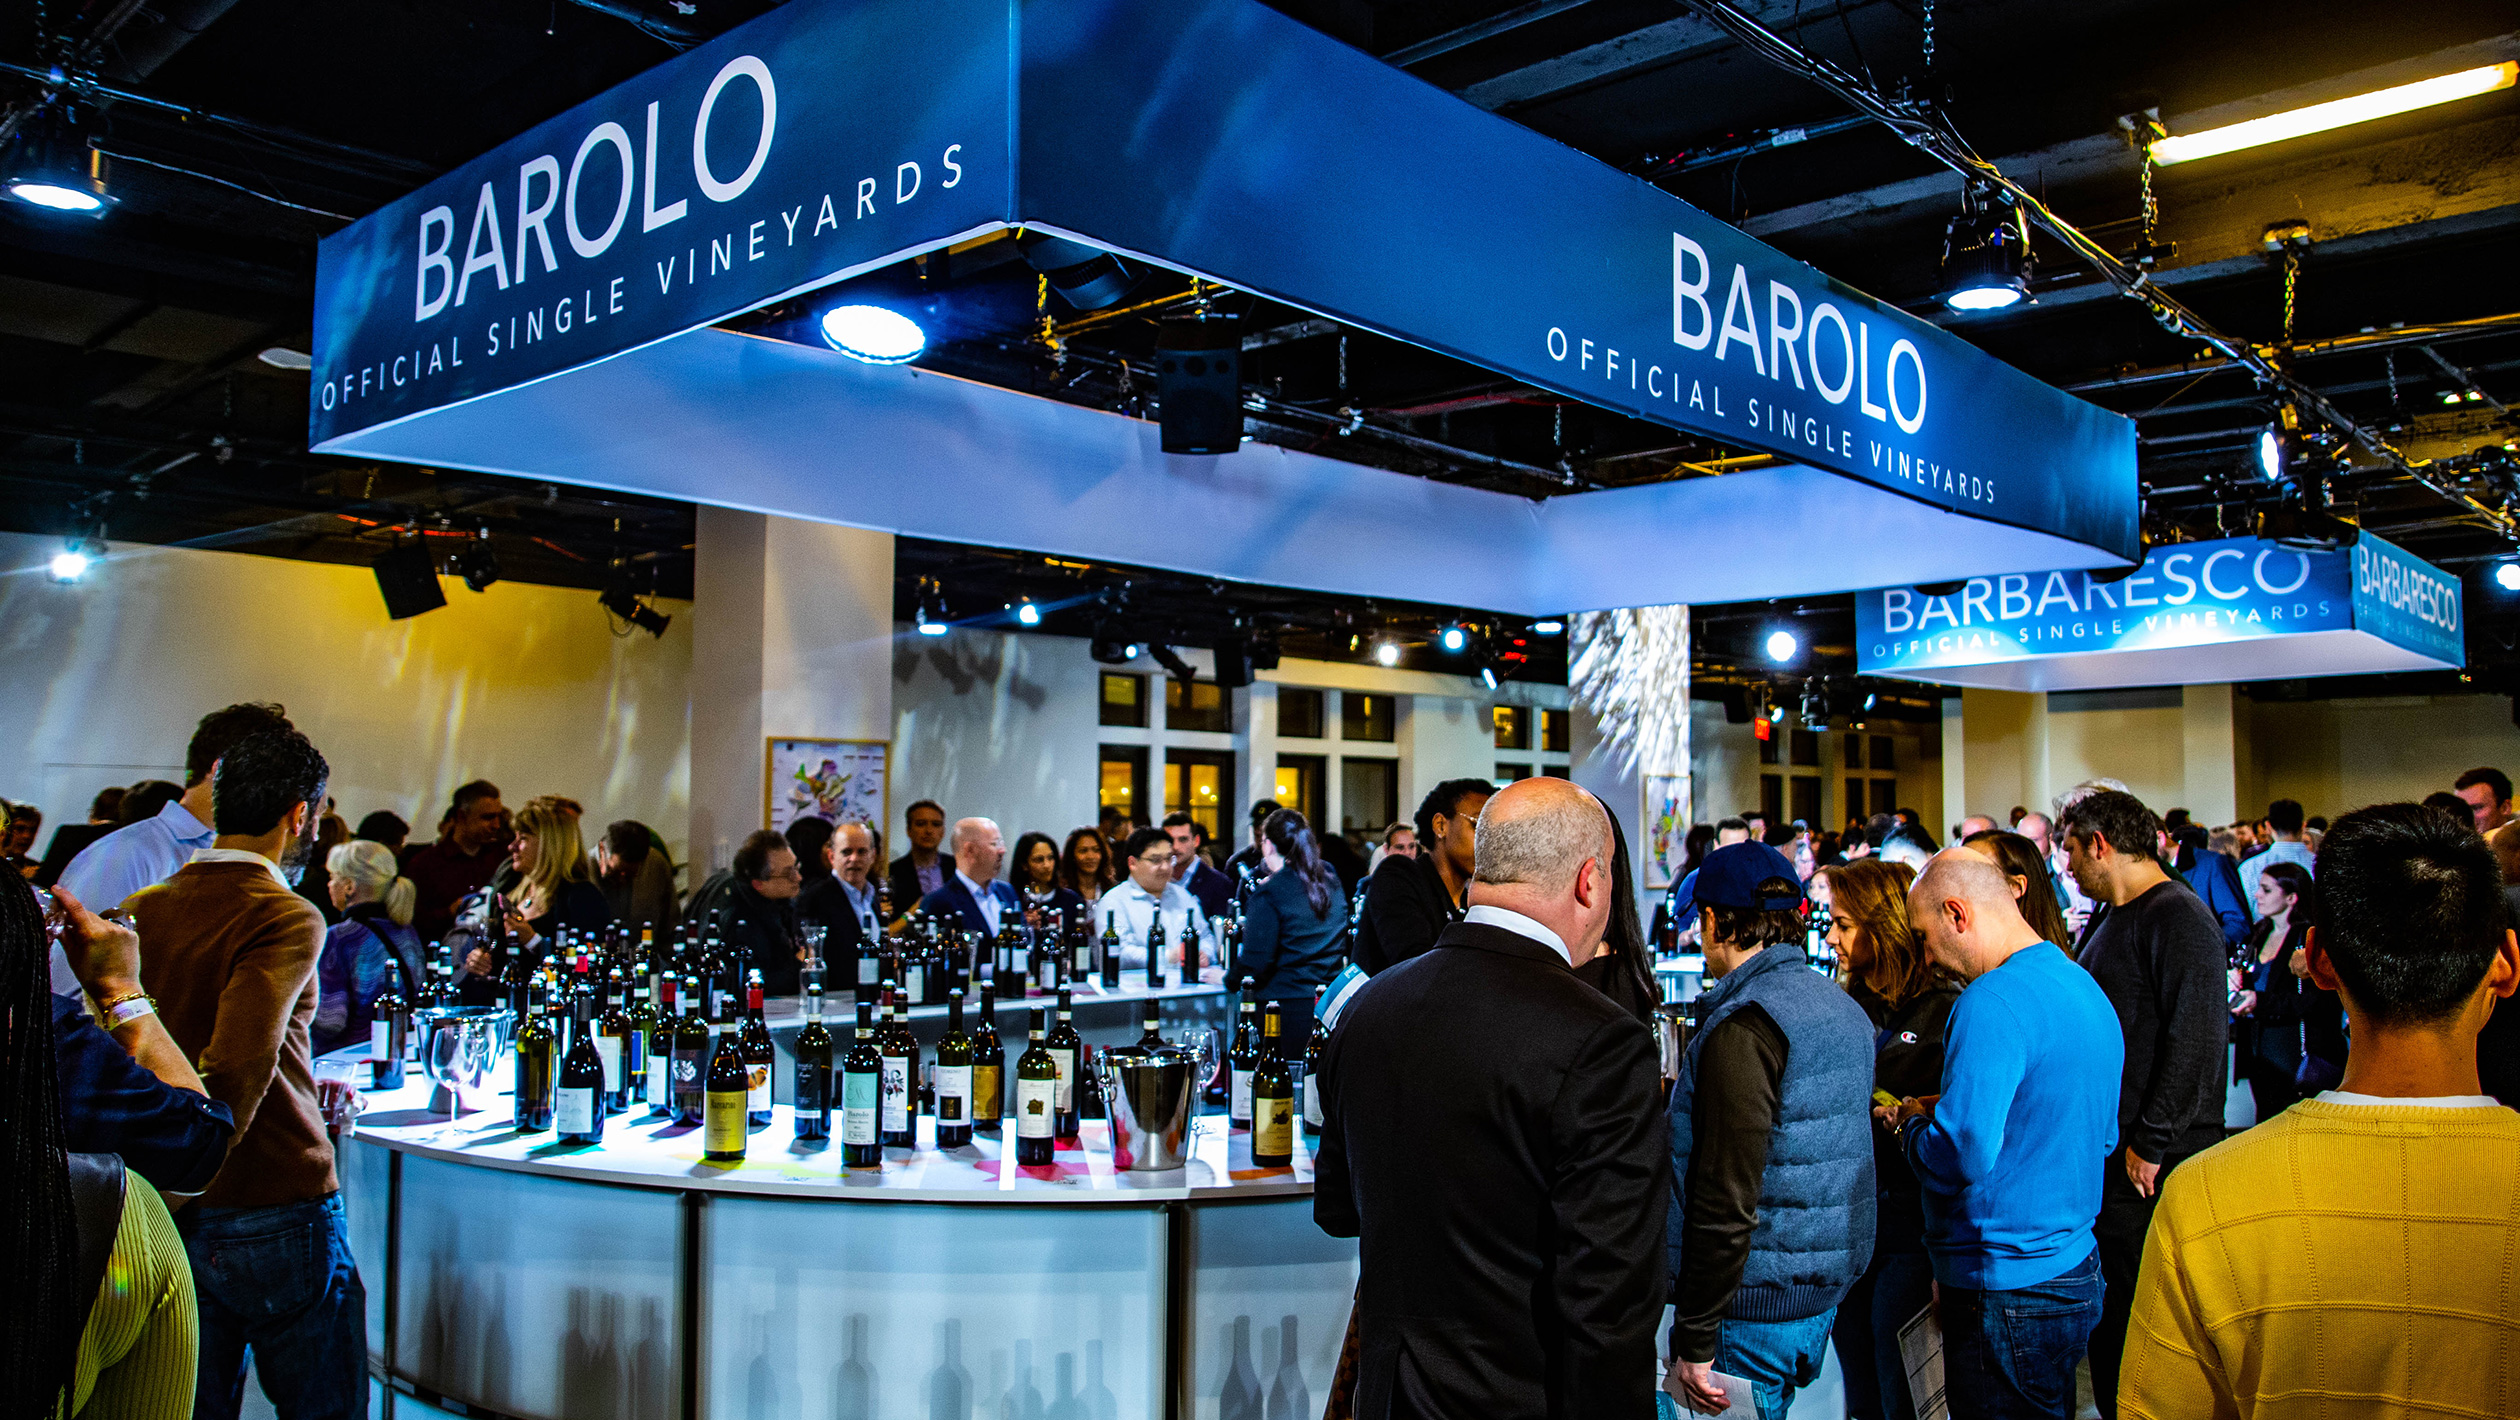 A photo from a previous year at an event for Barolo and Barbaresco